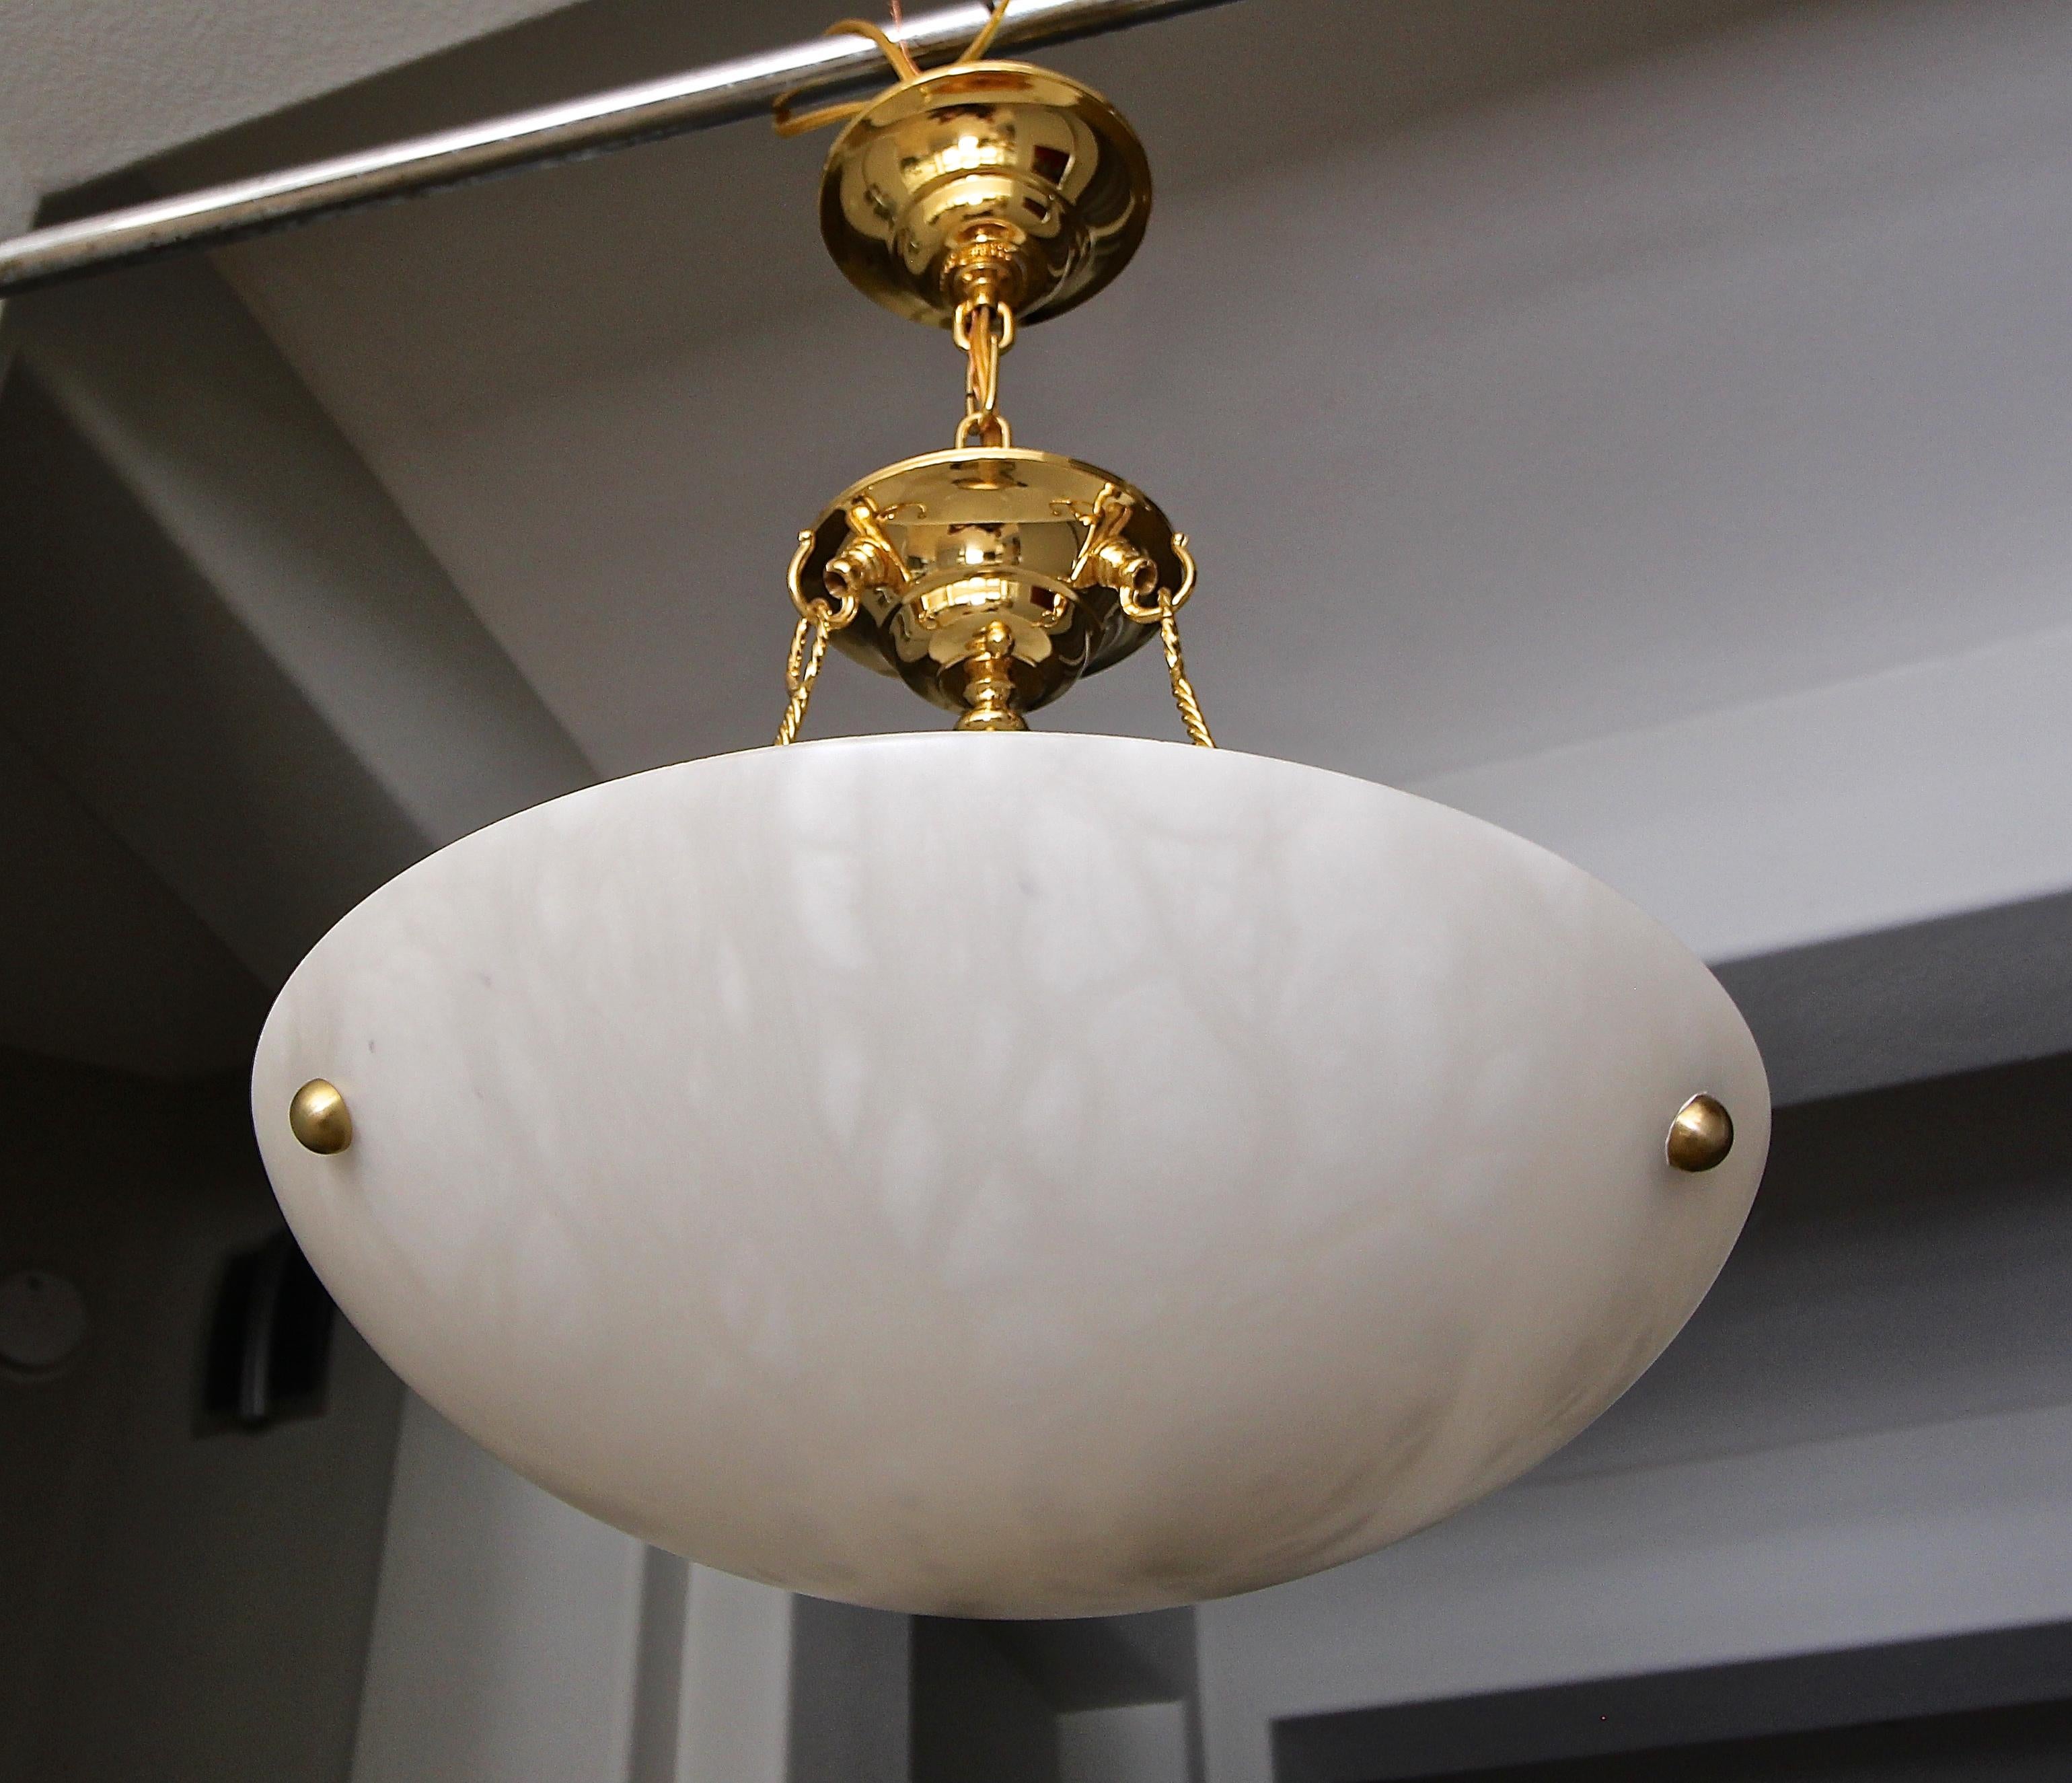 Sleek Italian made alabaster chandelier pendant ceiling 5-light with brass hardware fittings. Fixture uses 5 candelabra size bulbs size bulbs. Perfect for hall entry or smaller eating area. Diameter of bowl 15.75